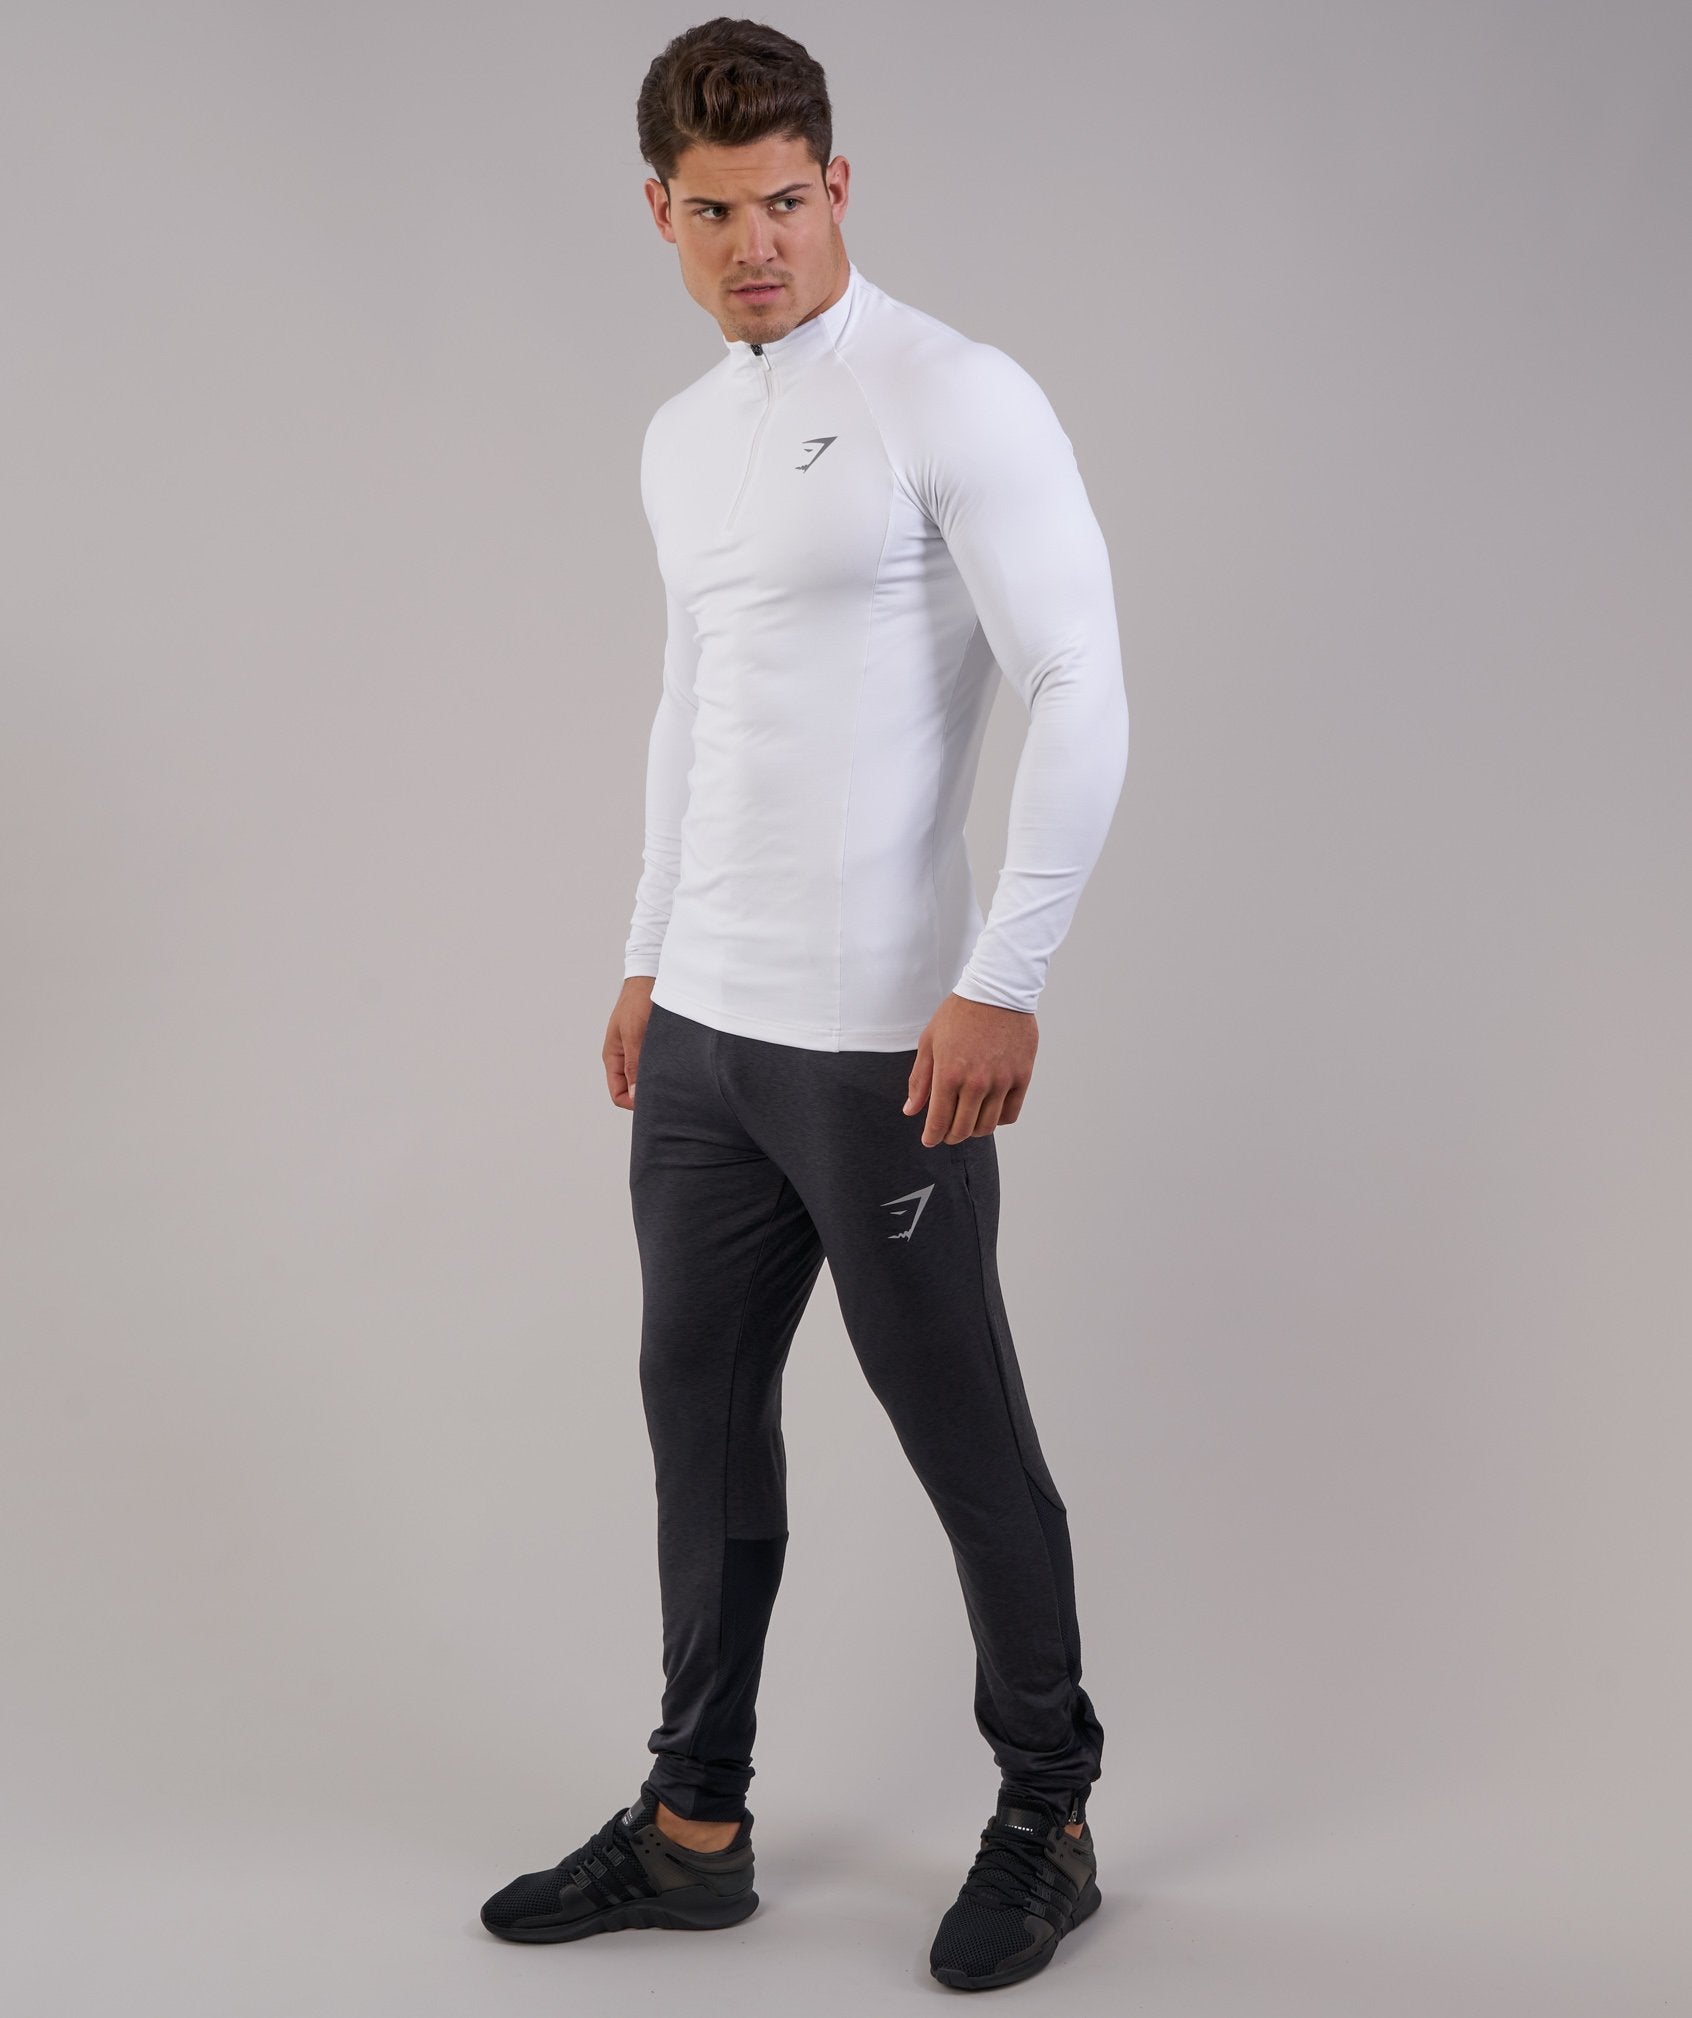 Edge 1/4 Zip Pullover in White - view 3